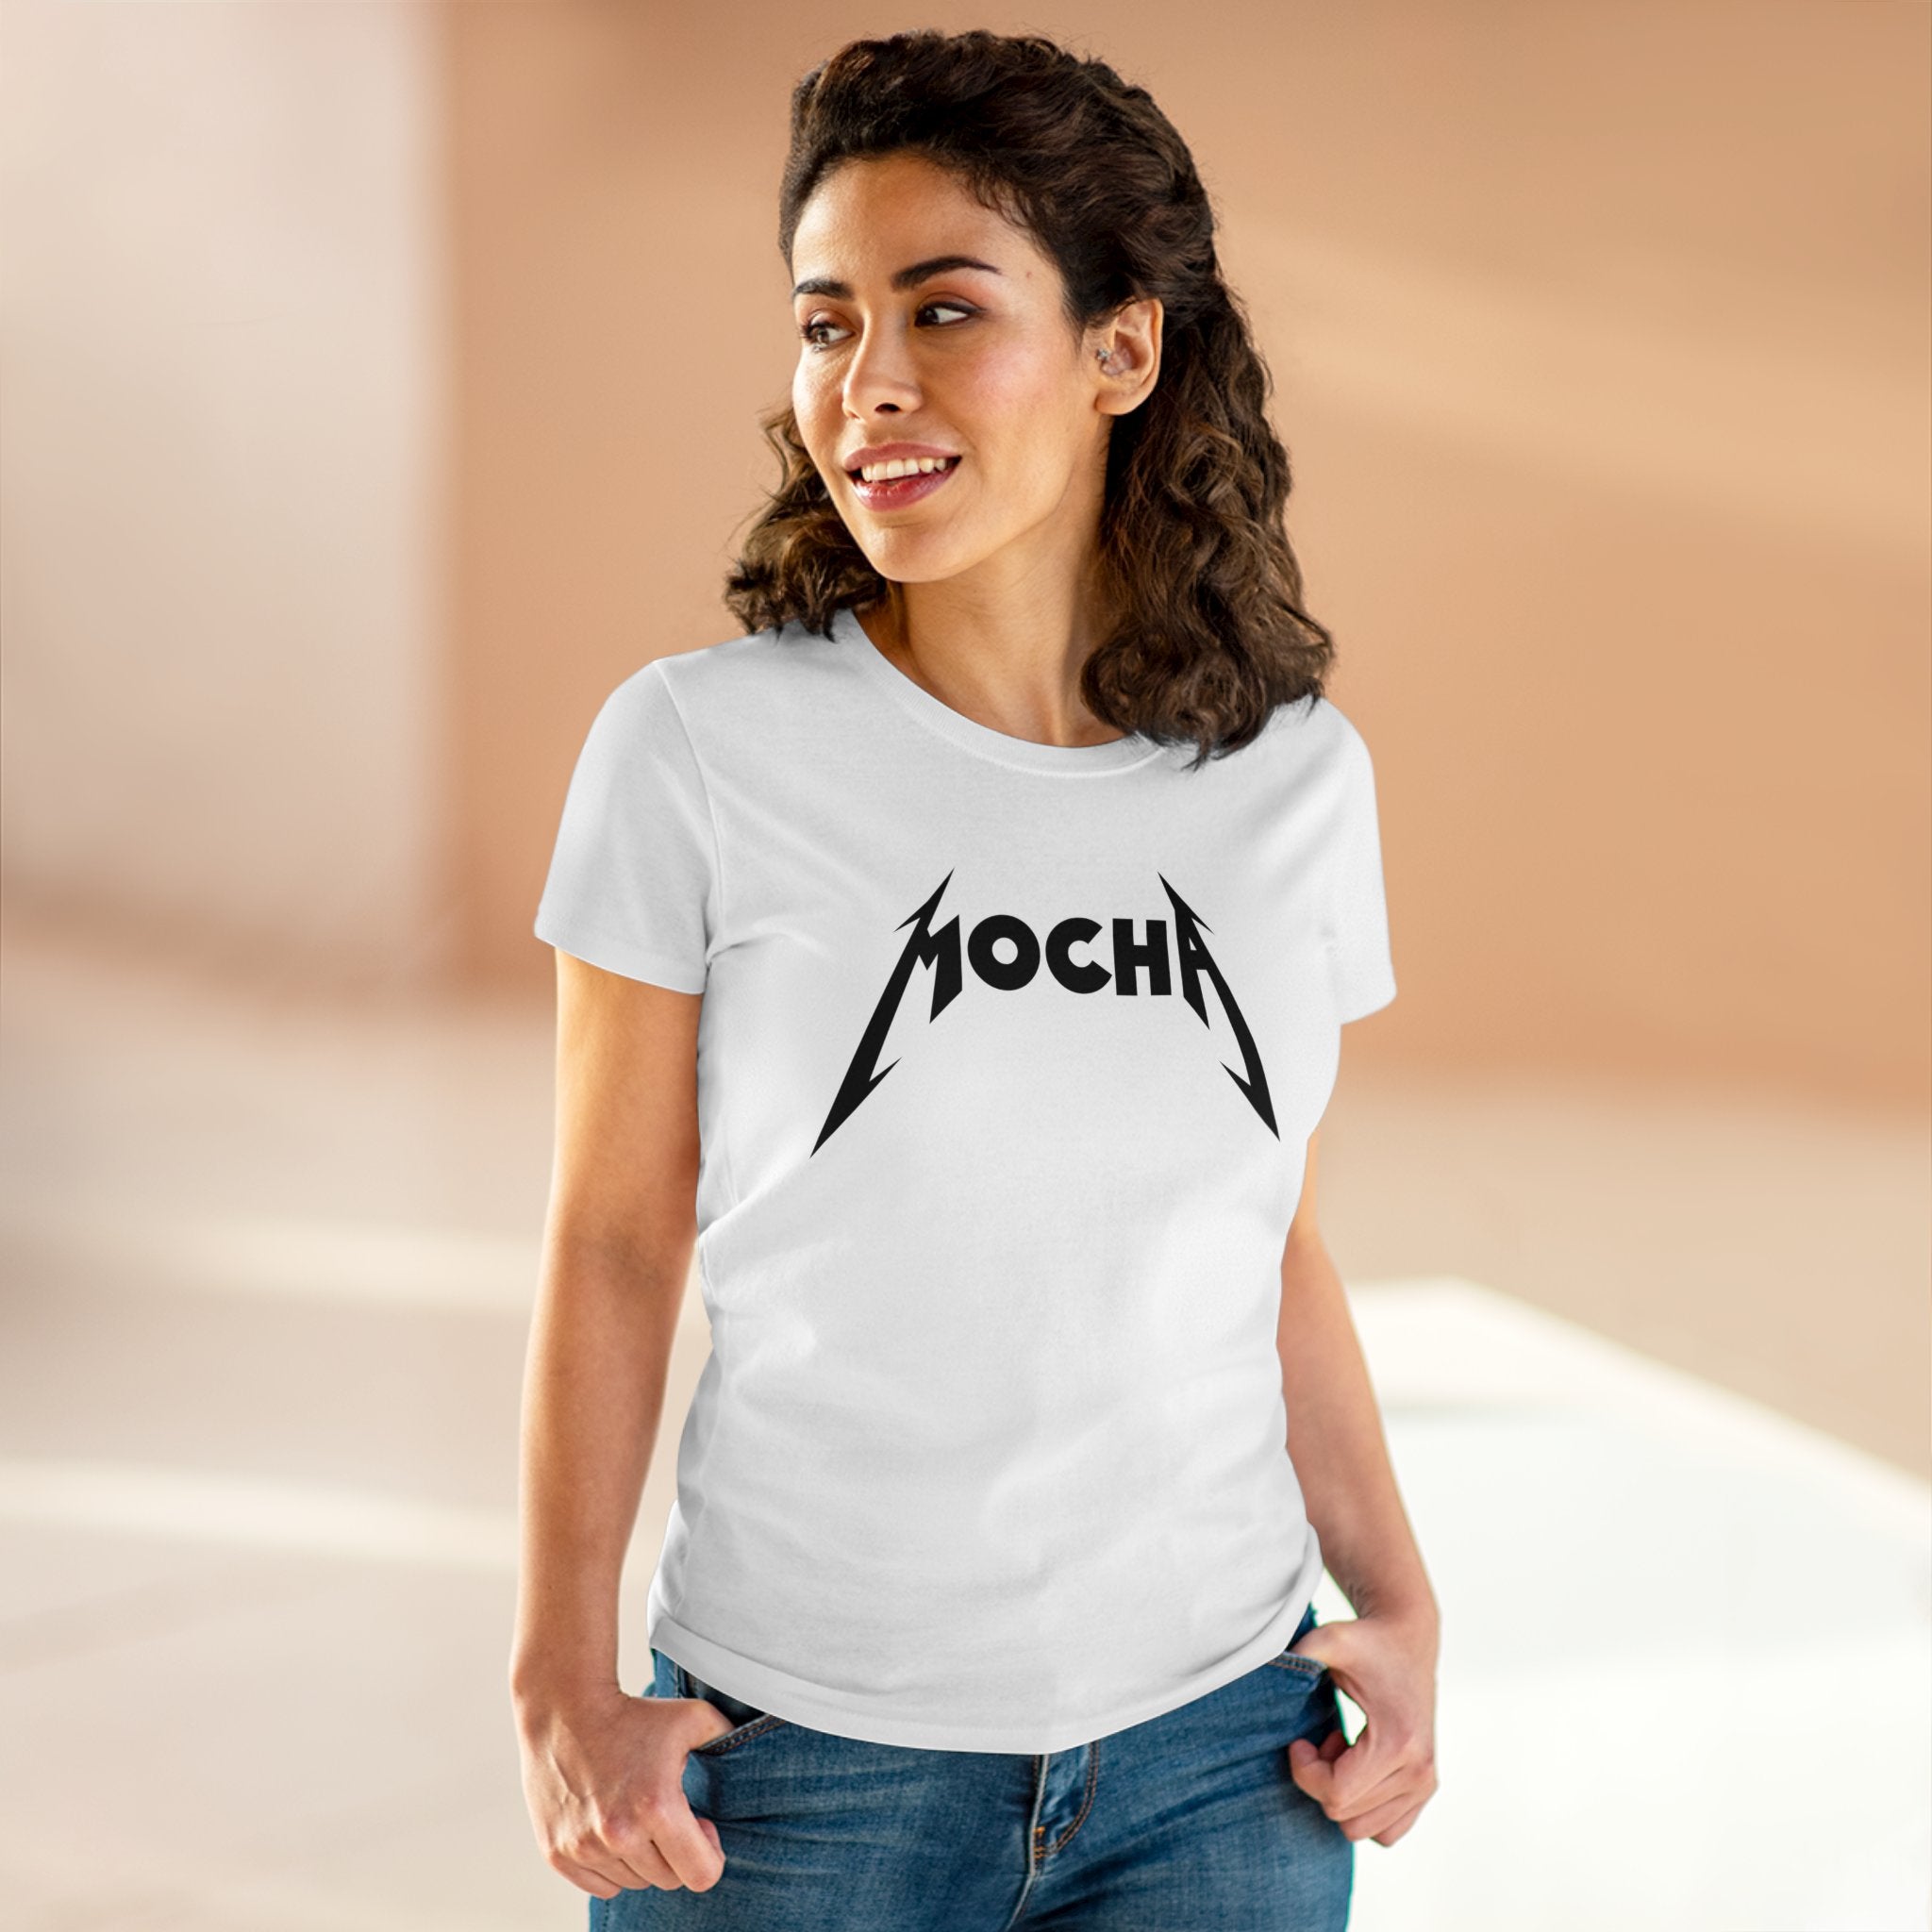 A person with curly hair is wearing a sleek white t-shirt with the word "Mocha - Women's Tee" written in a stylized, bold font. The shirt, made of soft light cotton and featuring a pre-shrunk fit, gleams under the well-lit room's illumination.